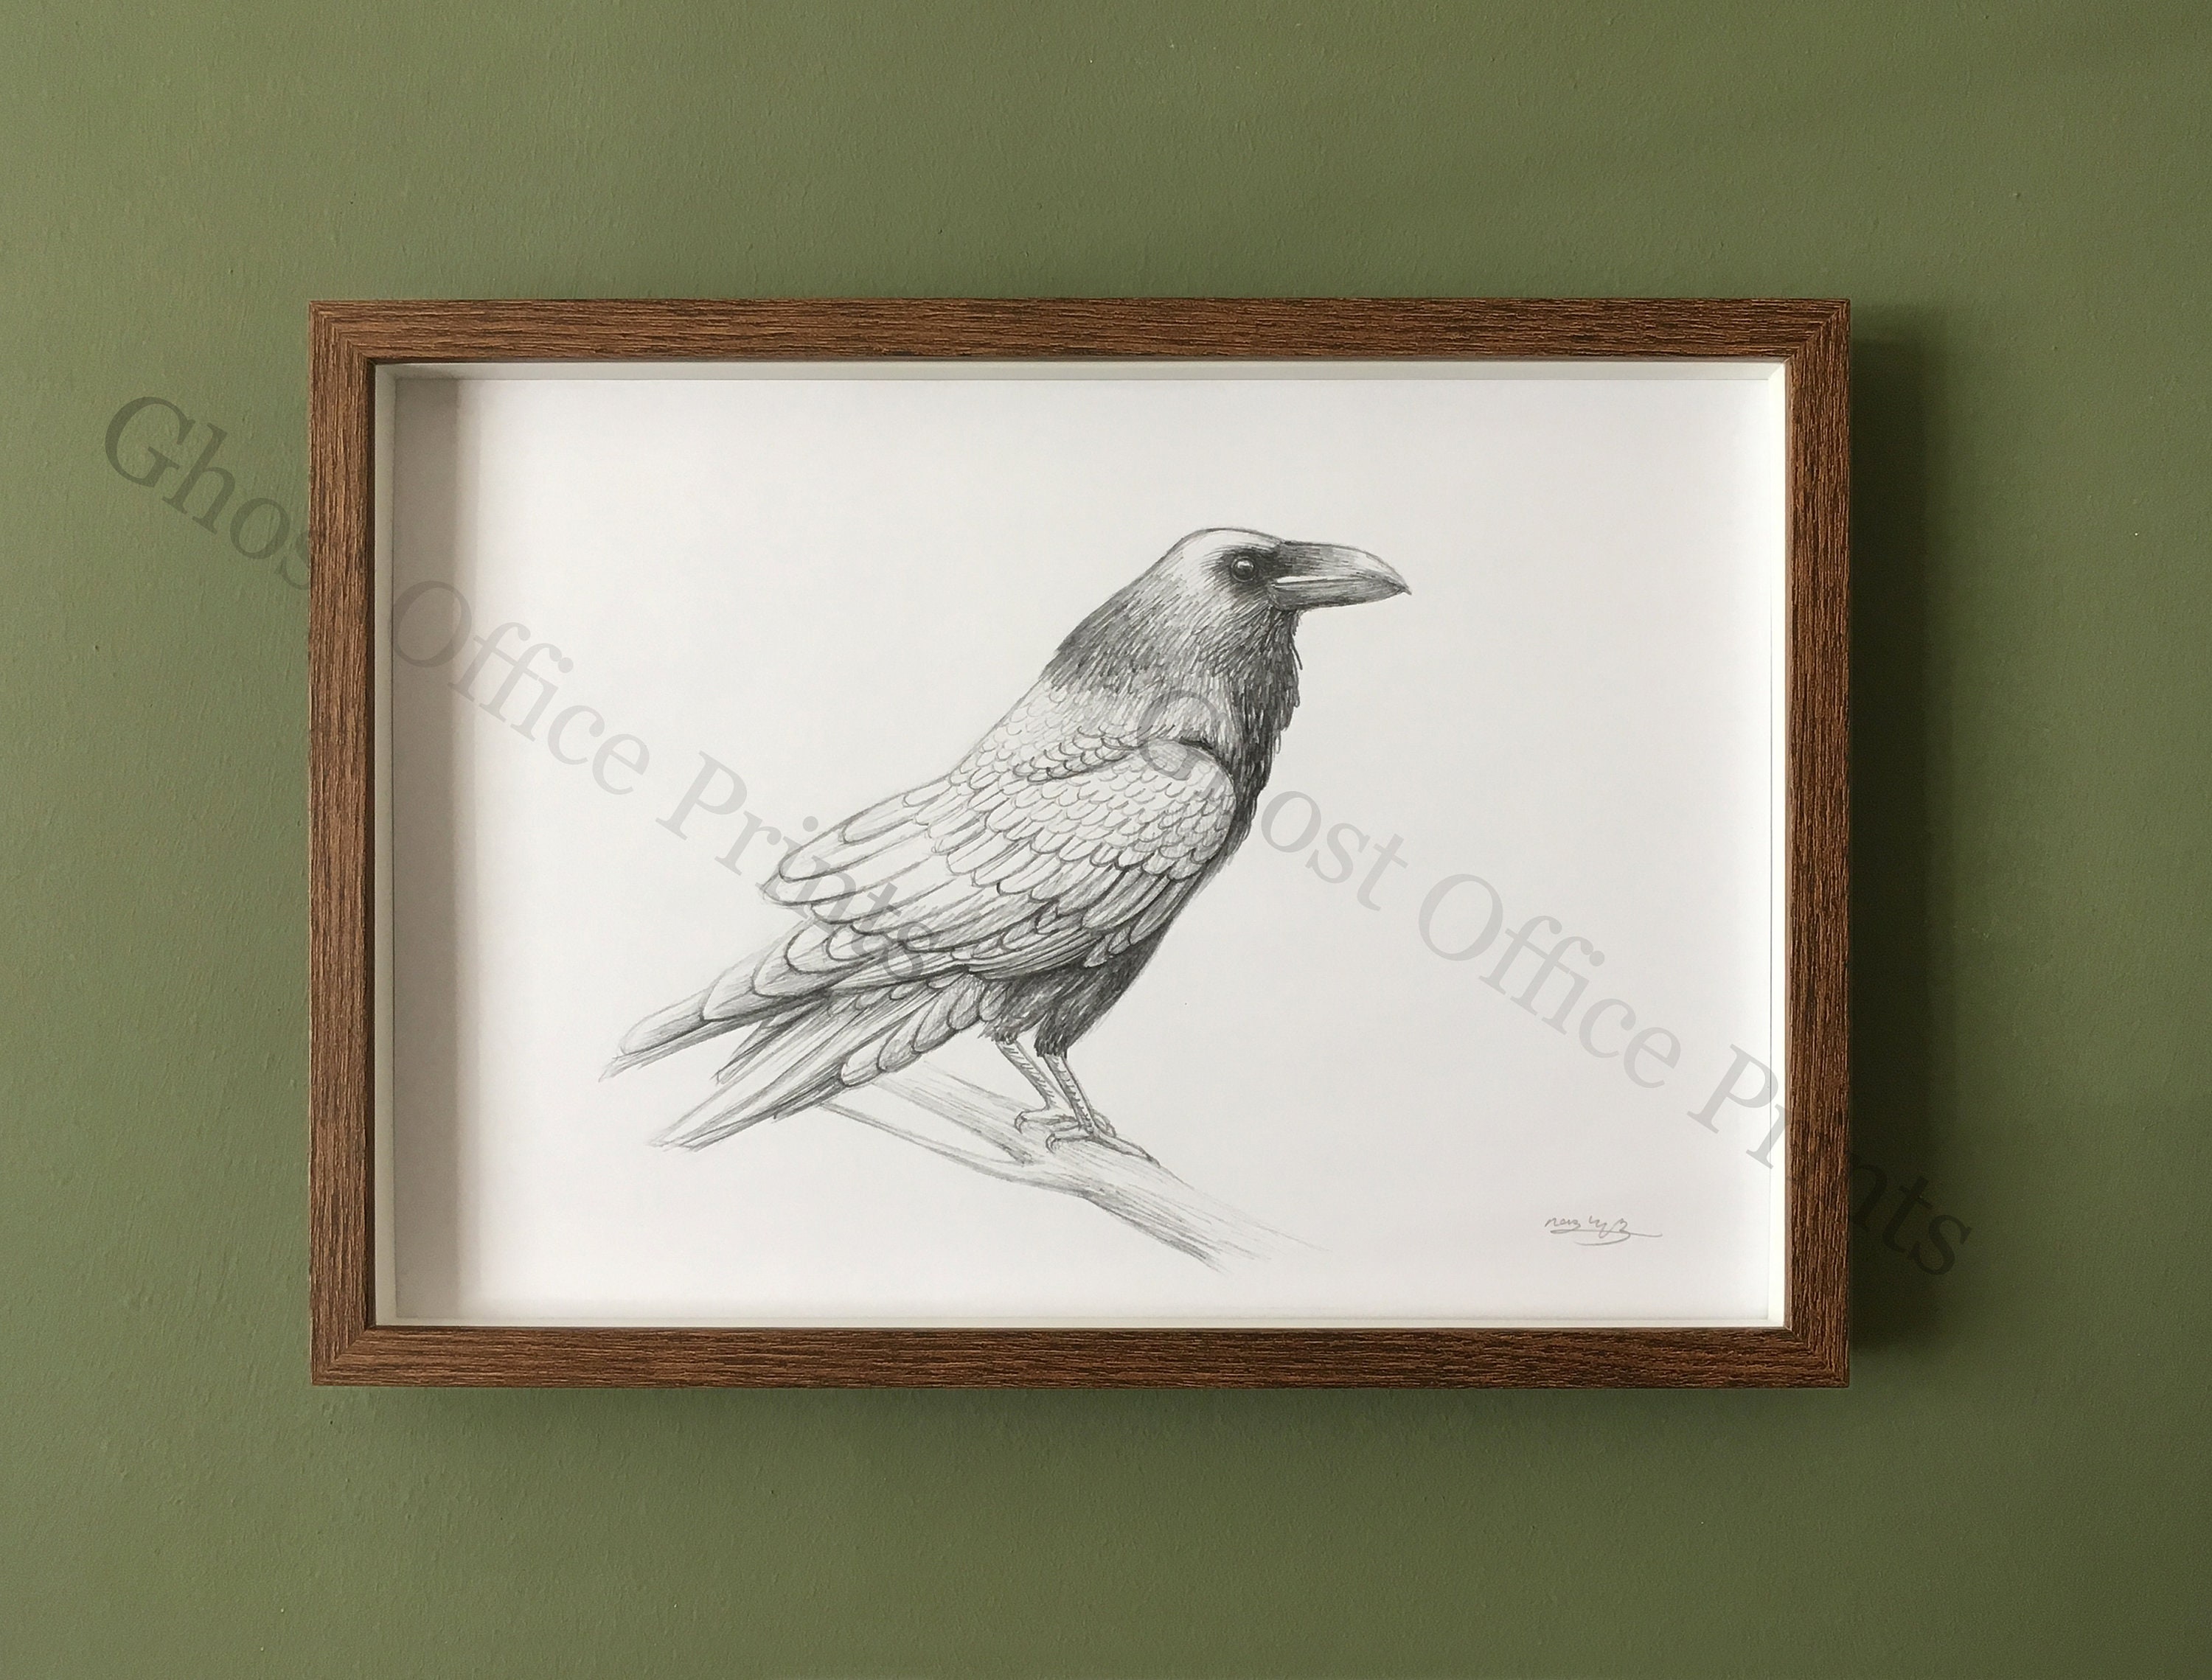 Funny Pens Gifts – Rustic Raven Home Decor